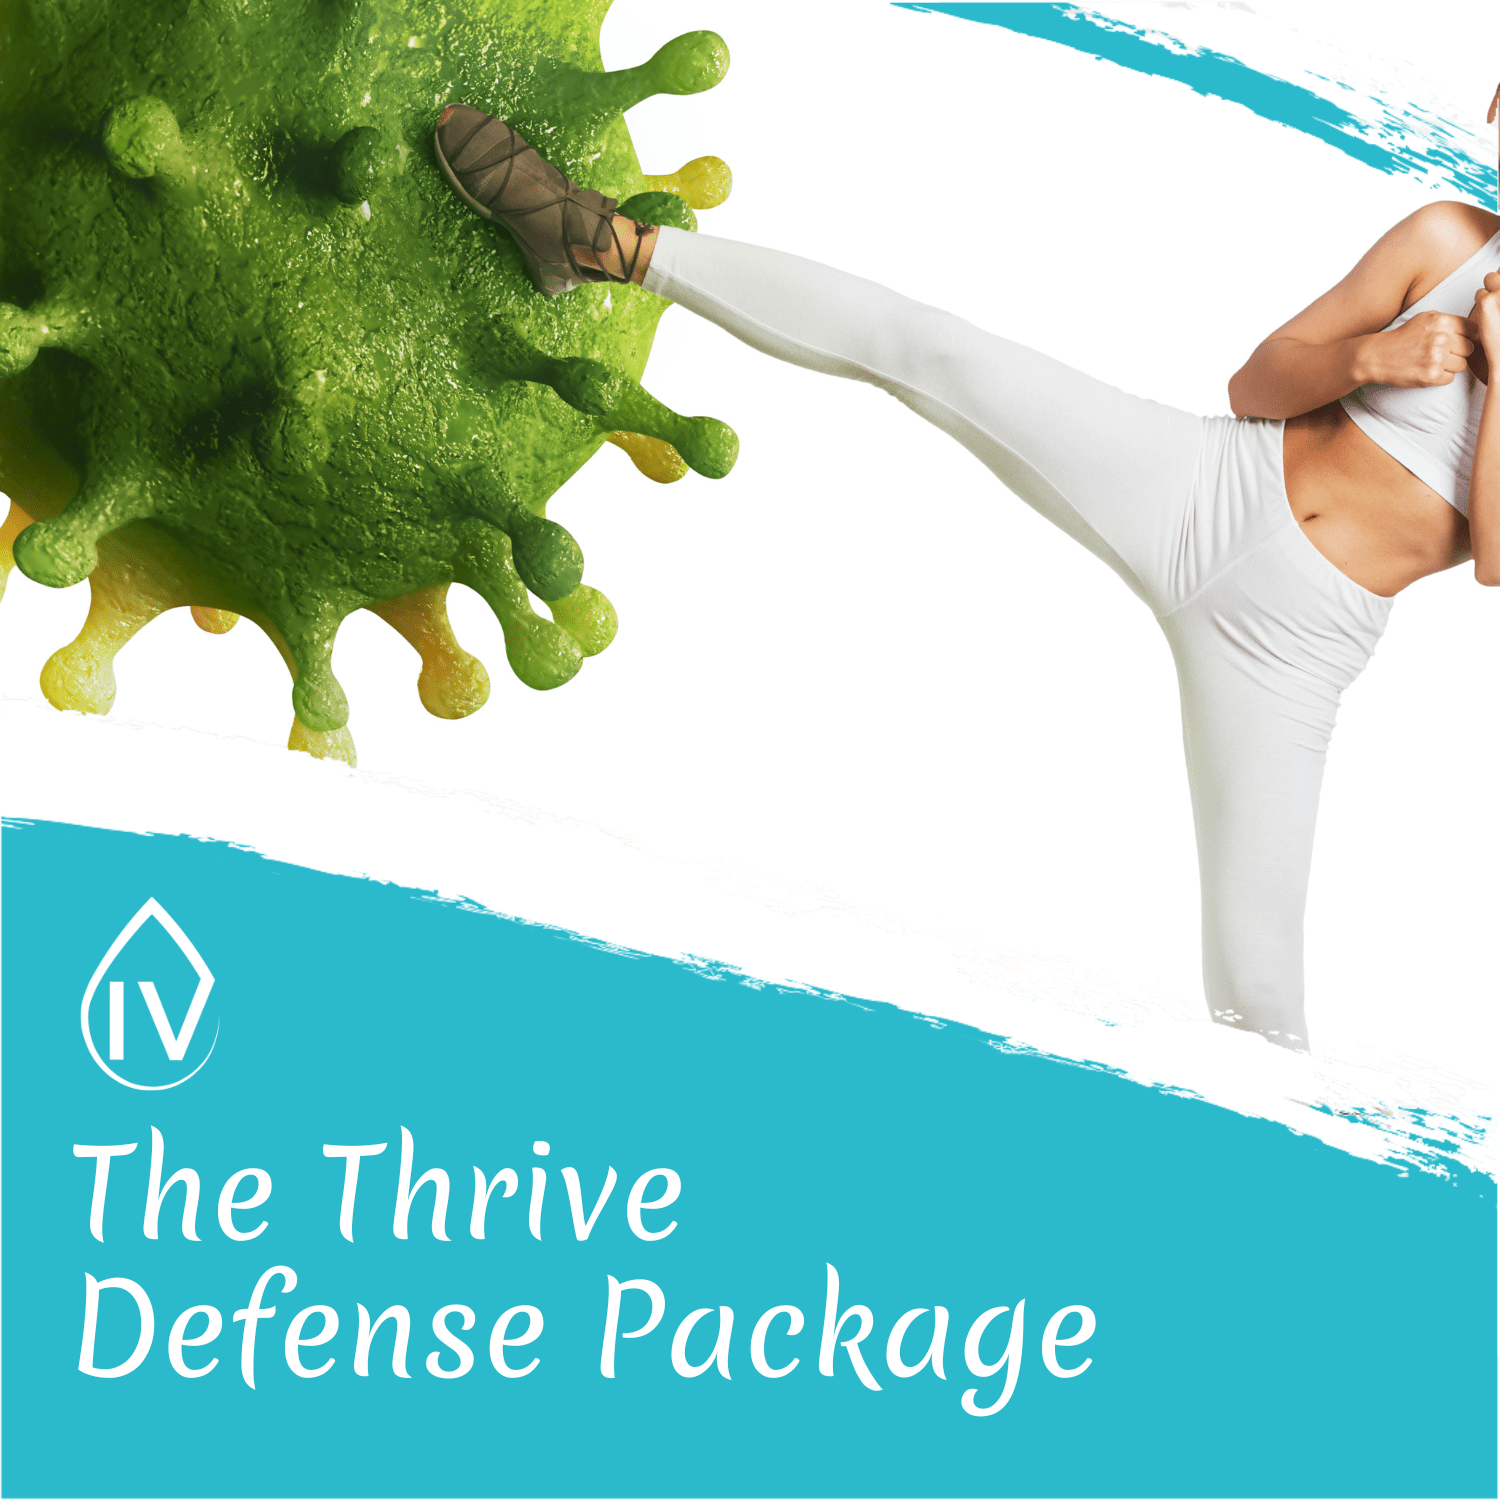 The Thrive Defense Package